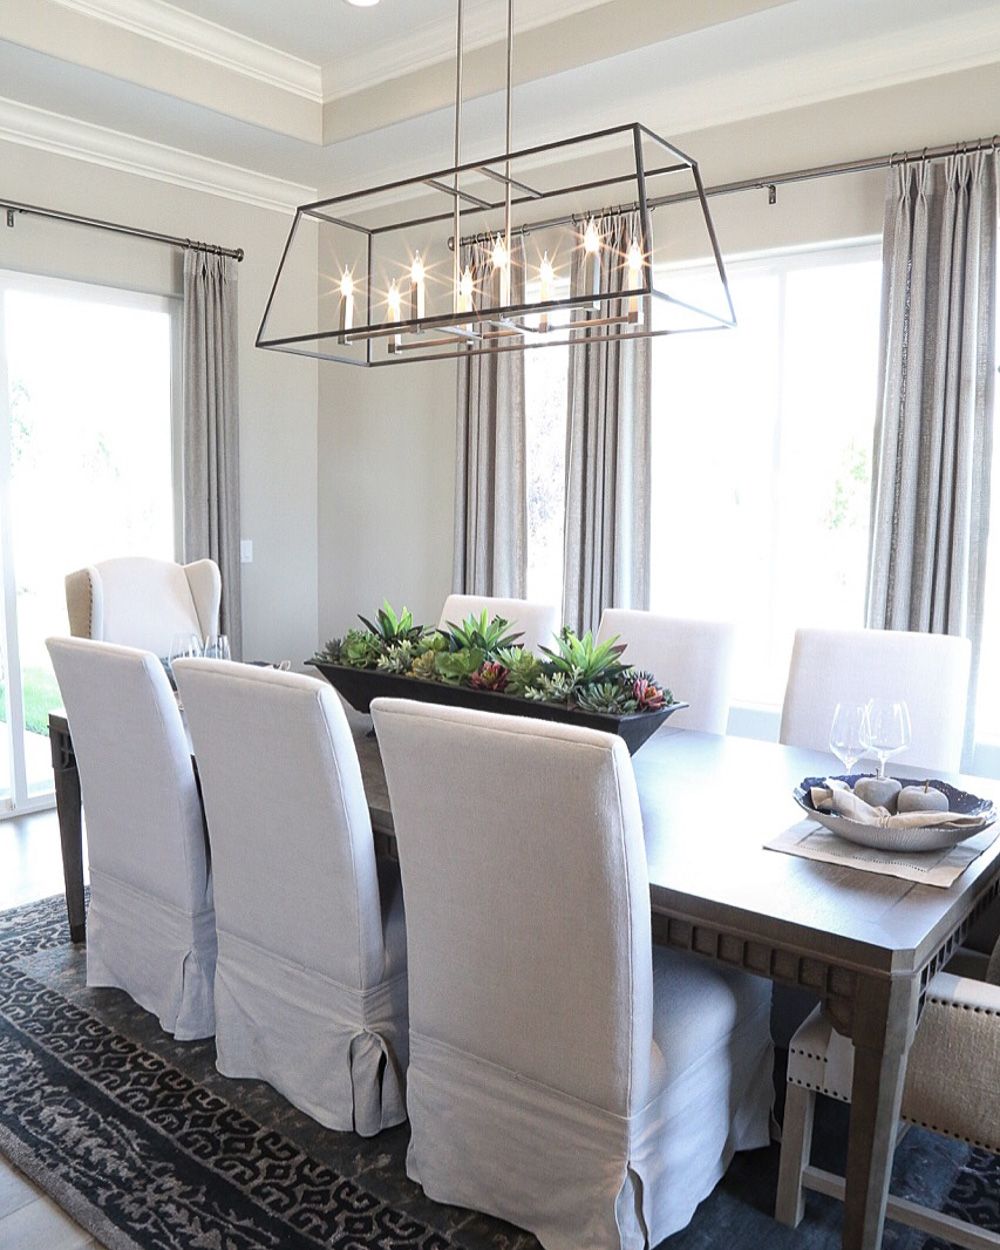 What to consider when choosing pendant lights for your home